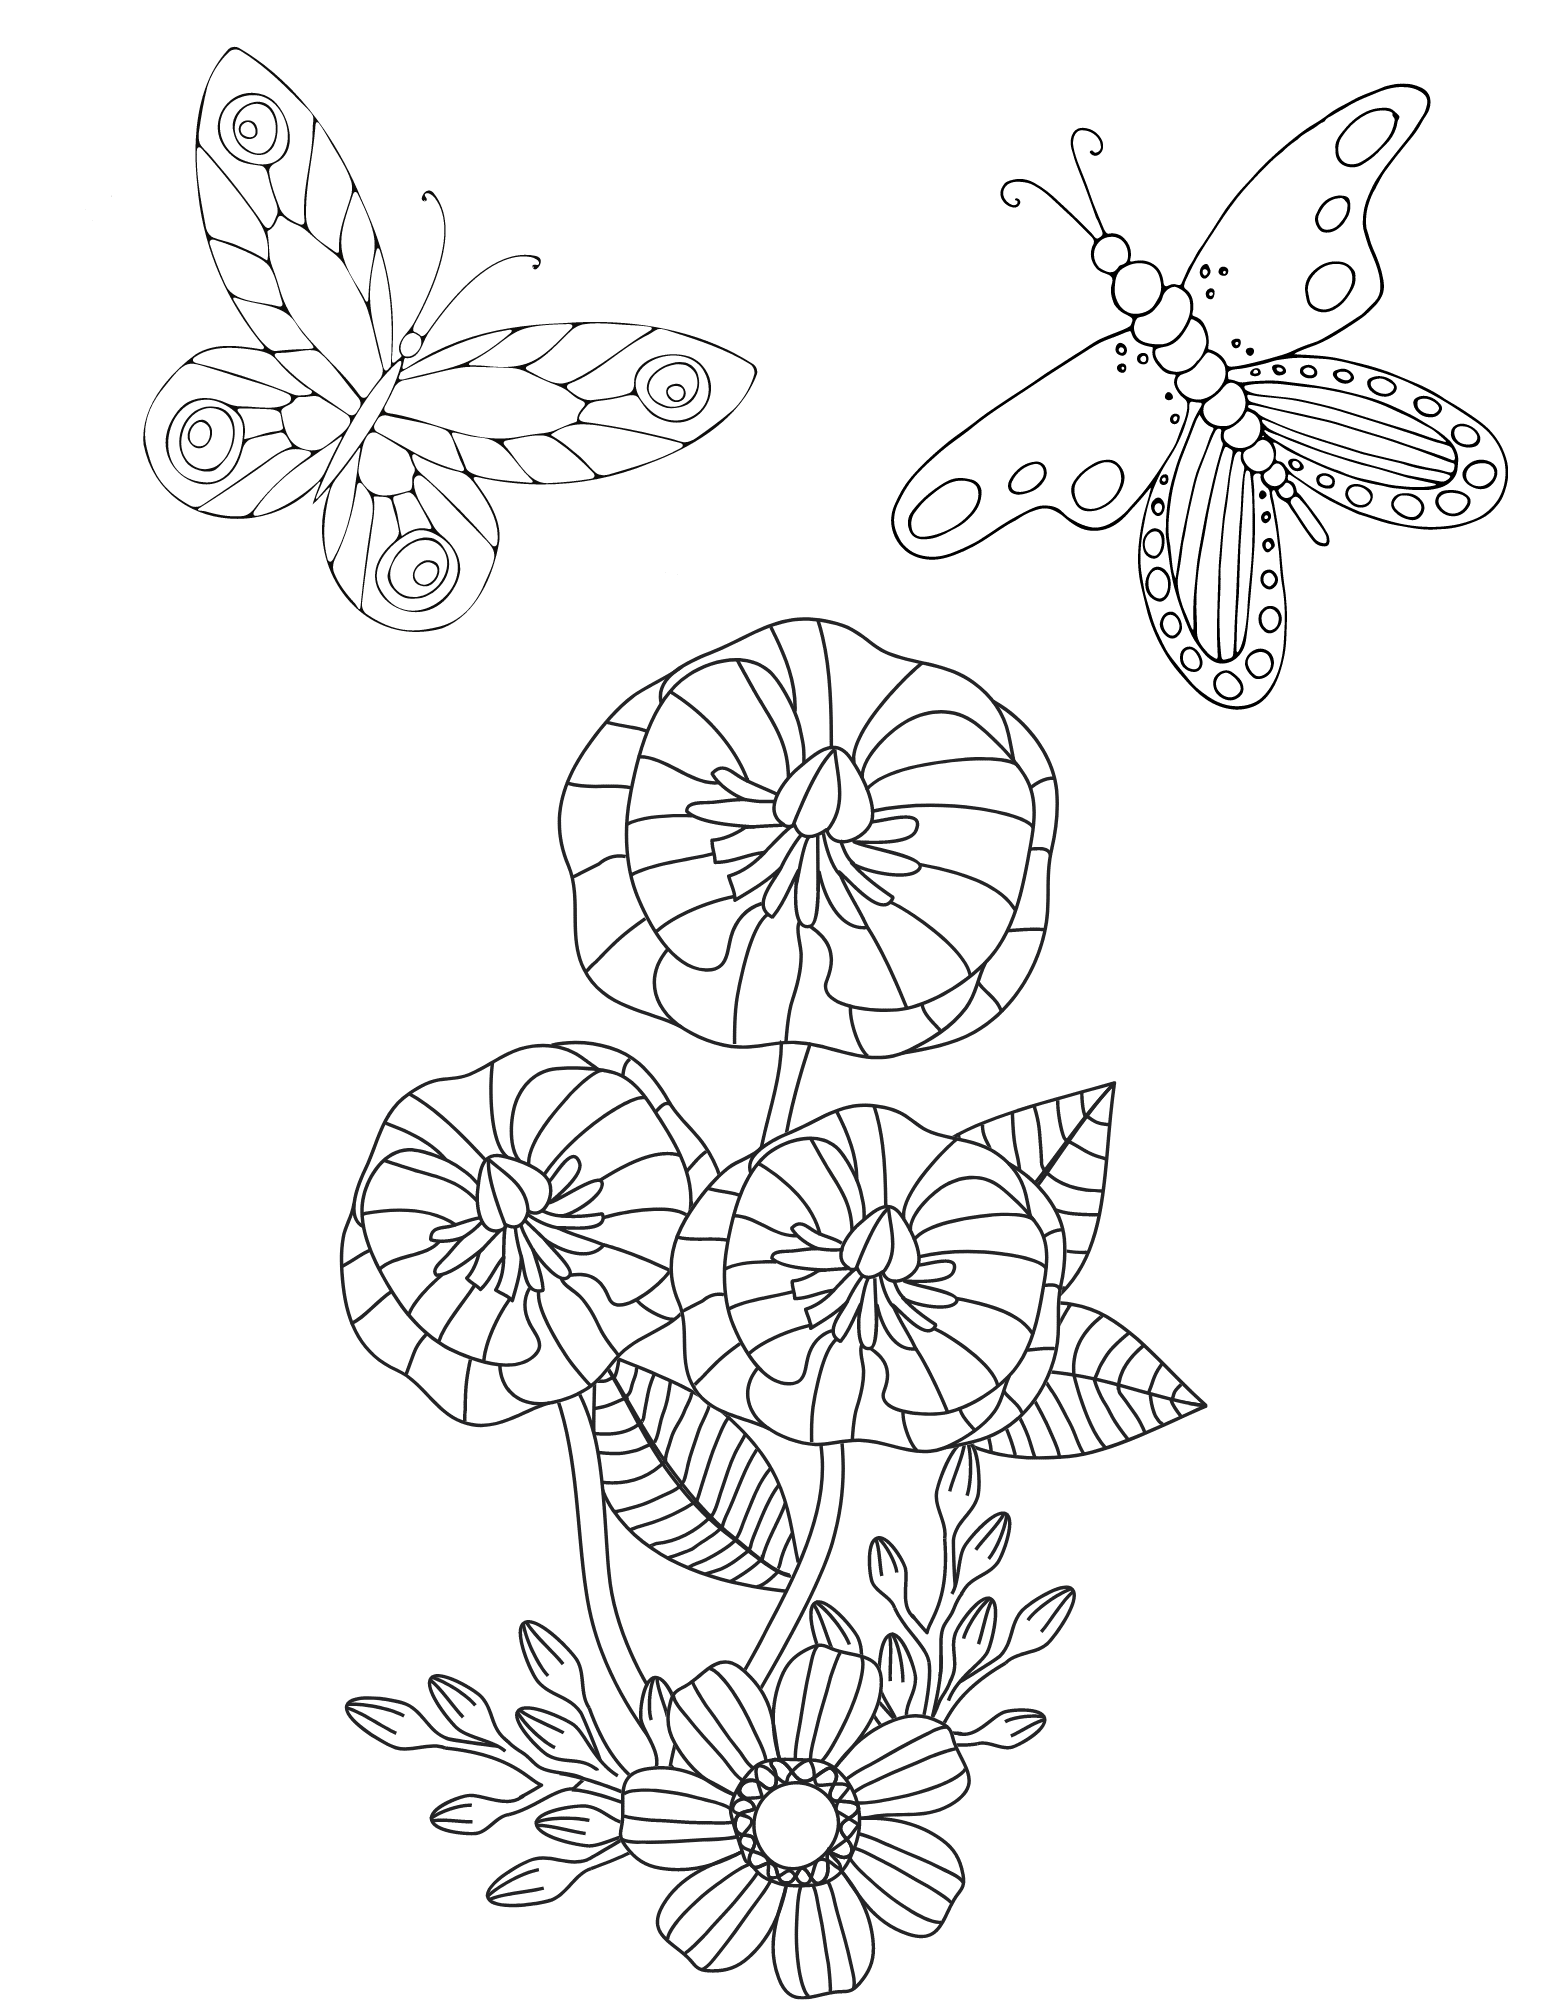 Color in this free printable Butterfly coloring page that features flowers and butterfly spring time scenery